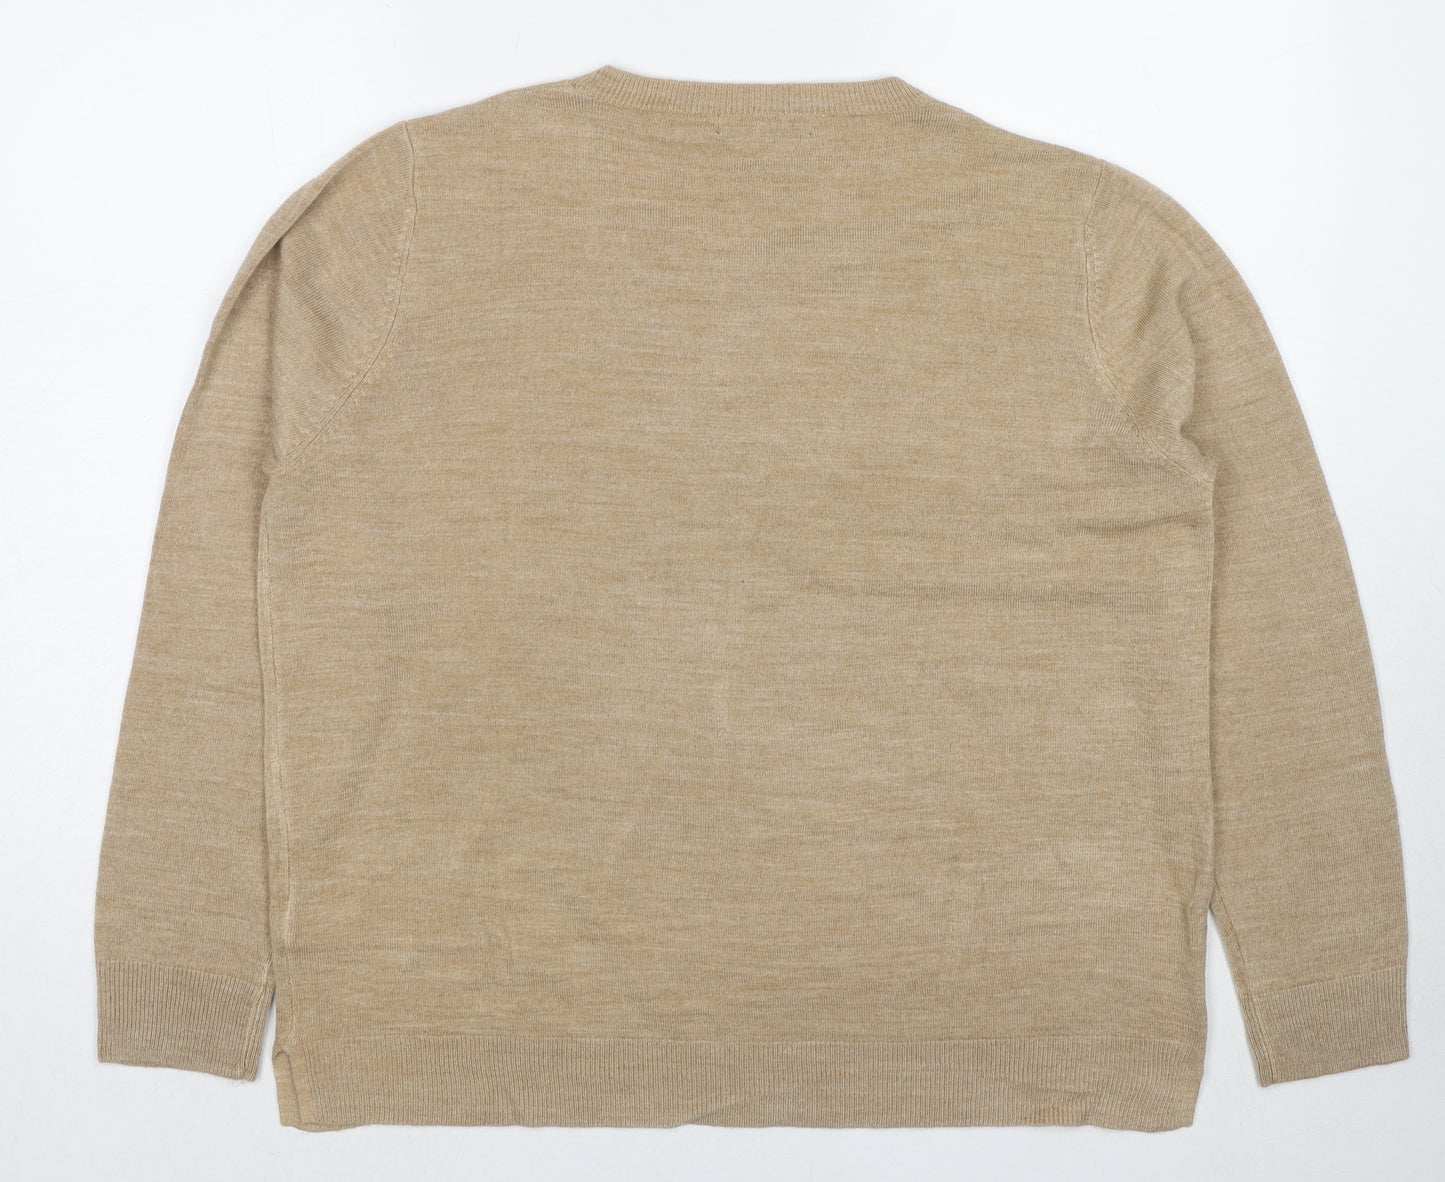 Marks and Spencer Womens Beige Round Neck Acrylic Pullover Jumper Size 20